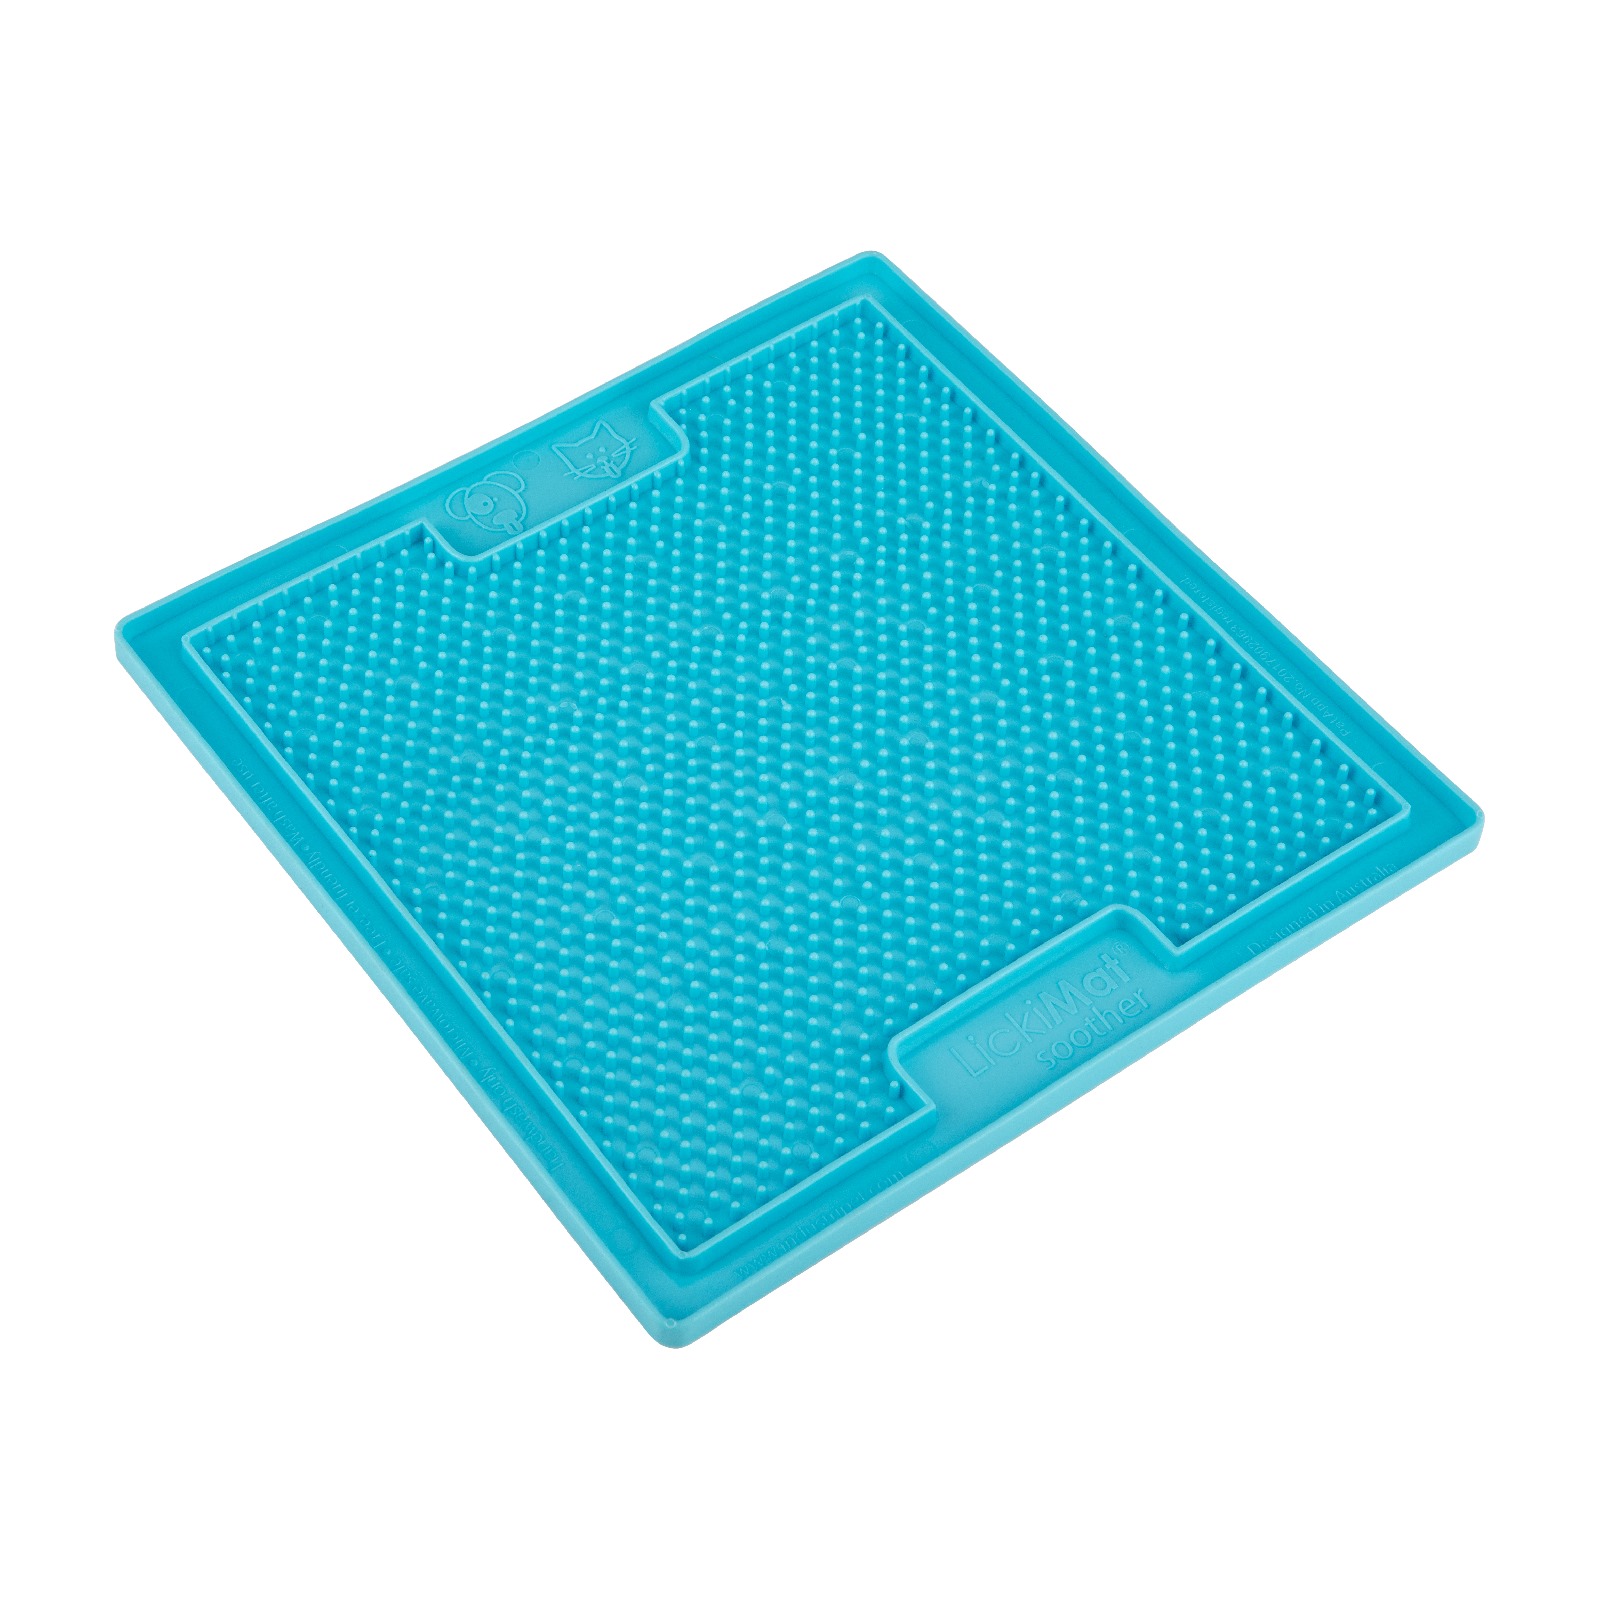 Lickimat Soother Original Slow Food Licking Mat for Cats & Dogs image 3